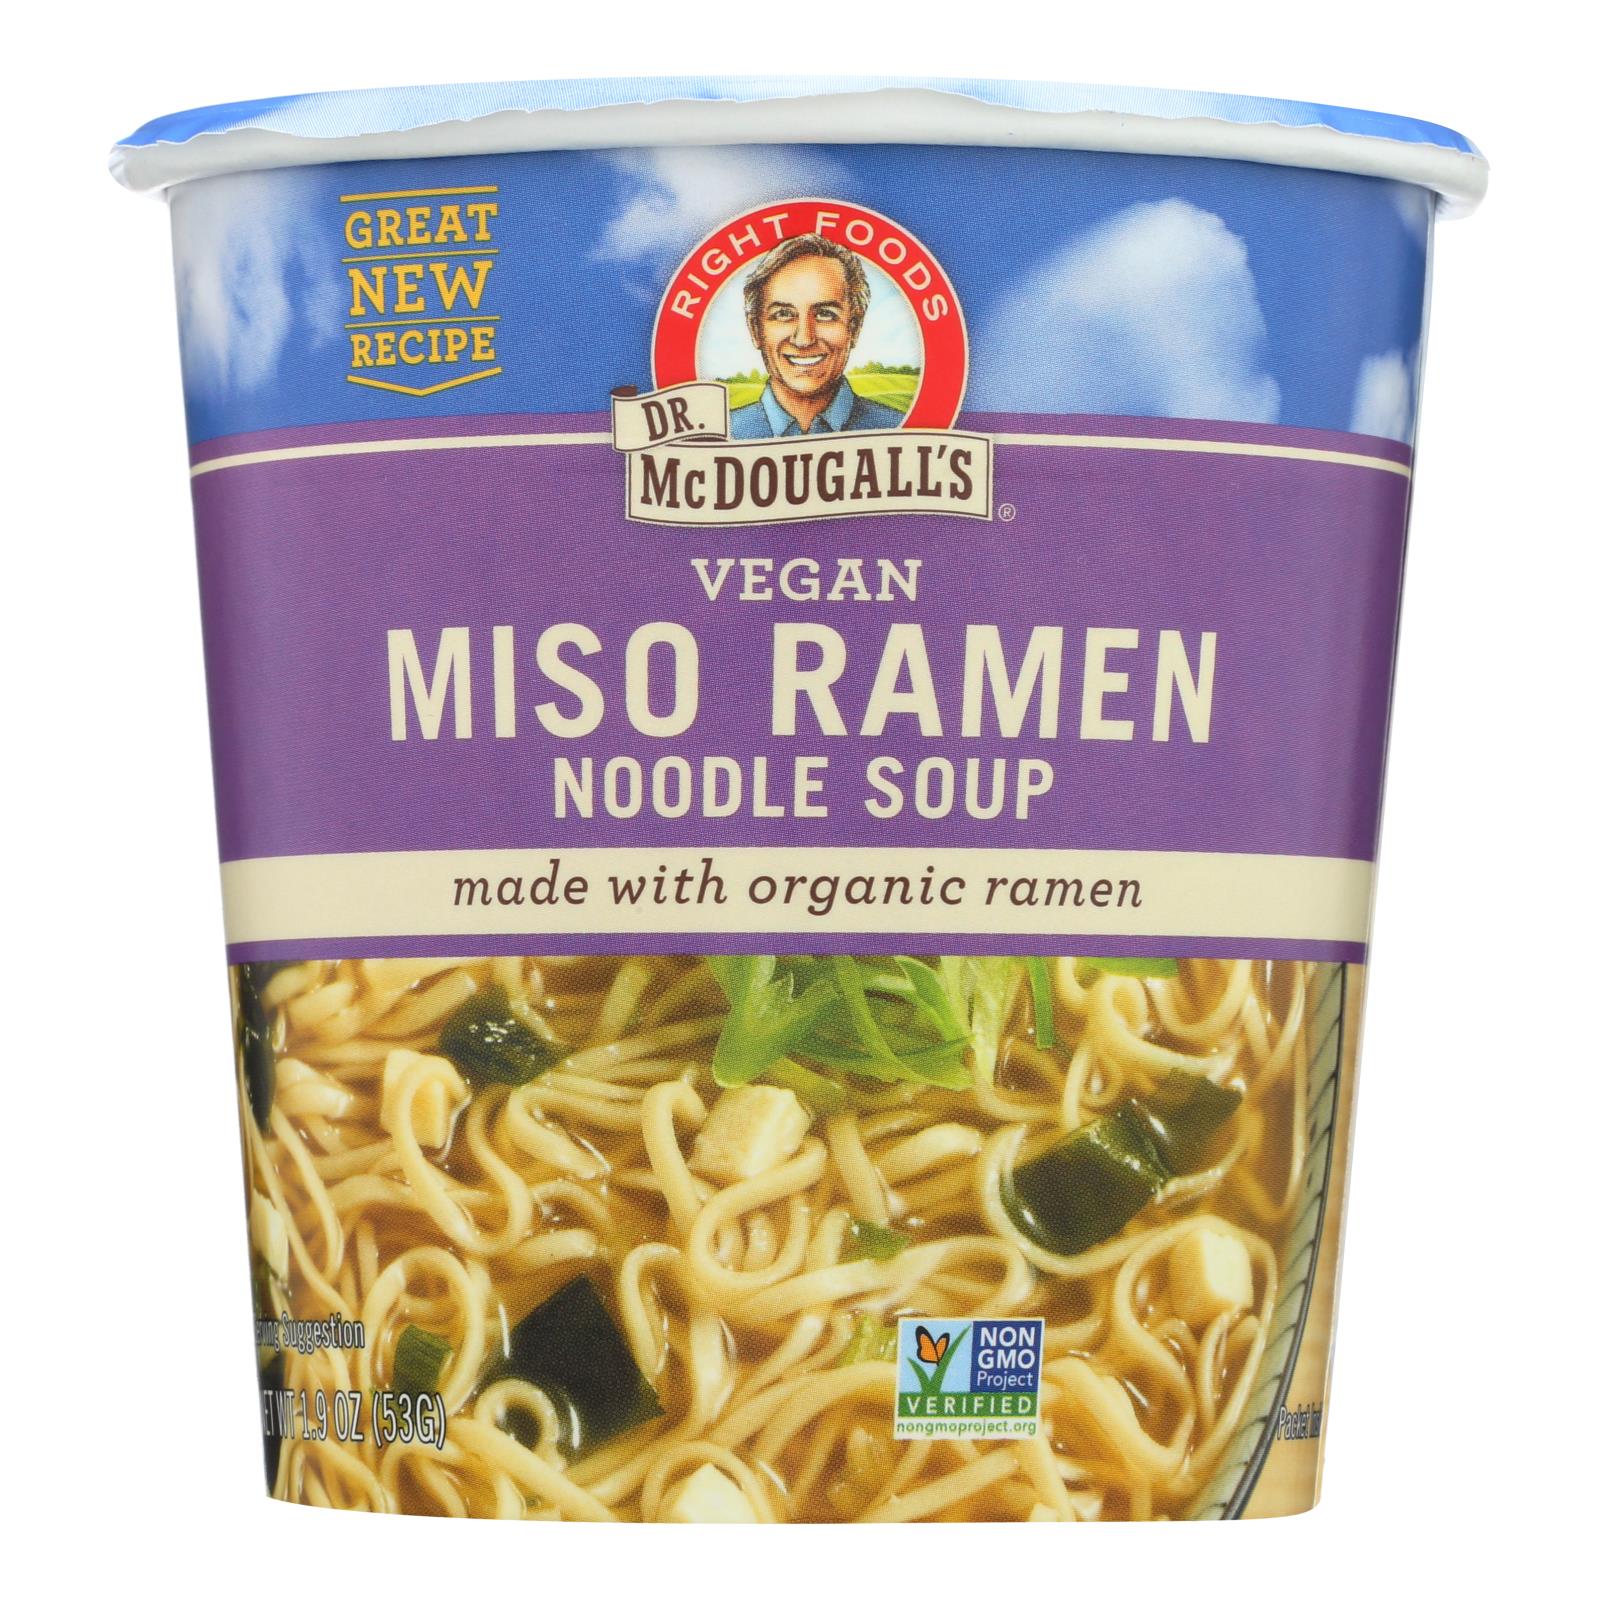 Dr. Mcdougall's Vegan Miso Ramen Soup Big Cup With Noodles - Case Of 6 - 1.9 Oz. - Whole Green Foods